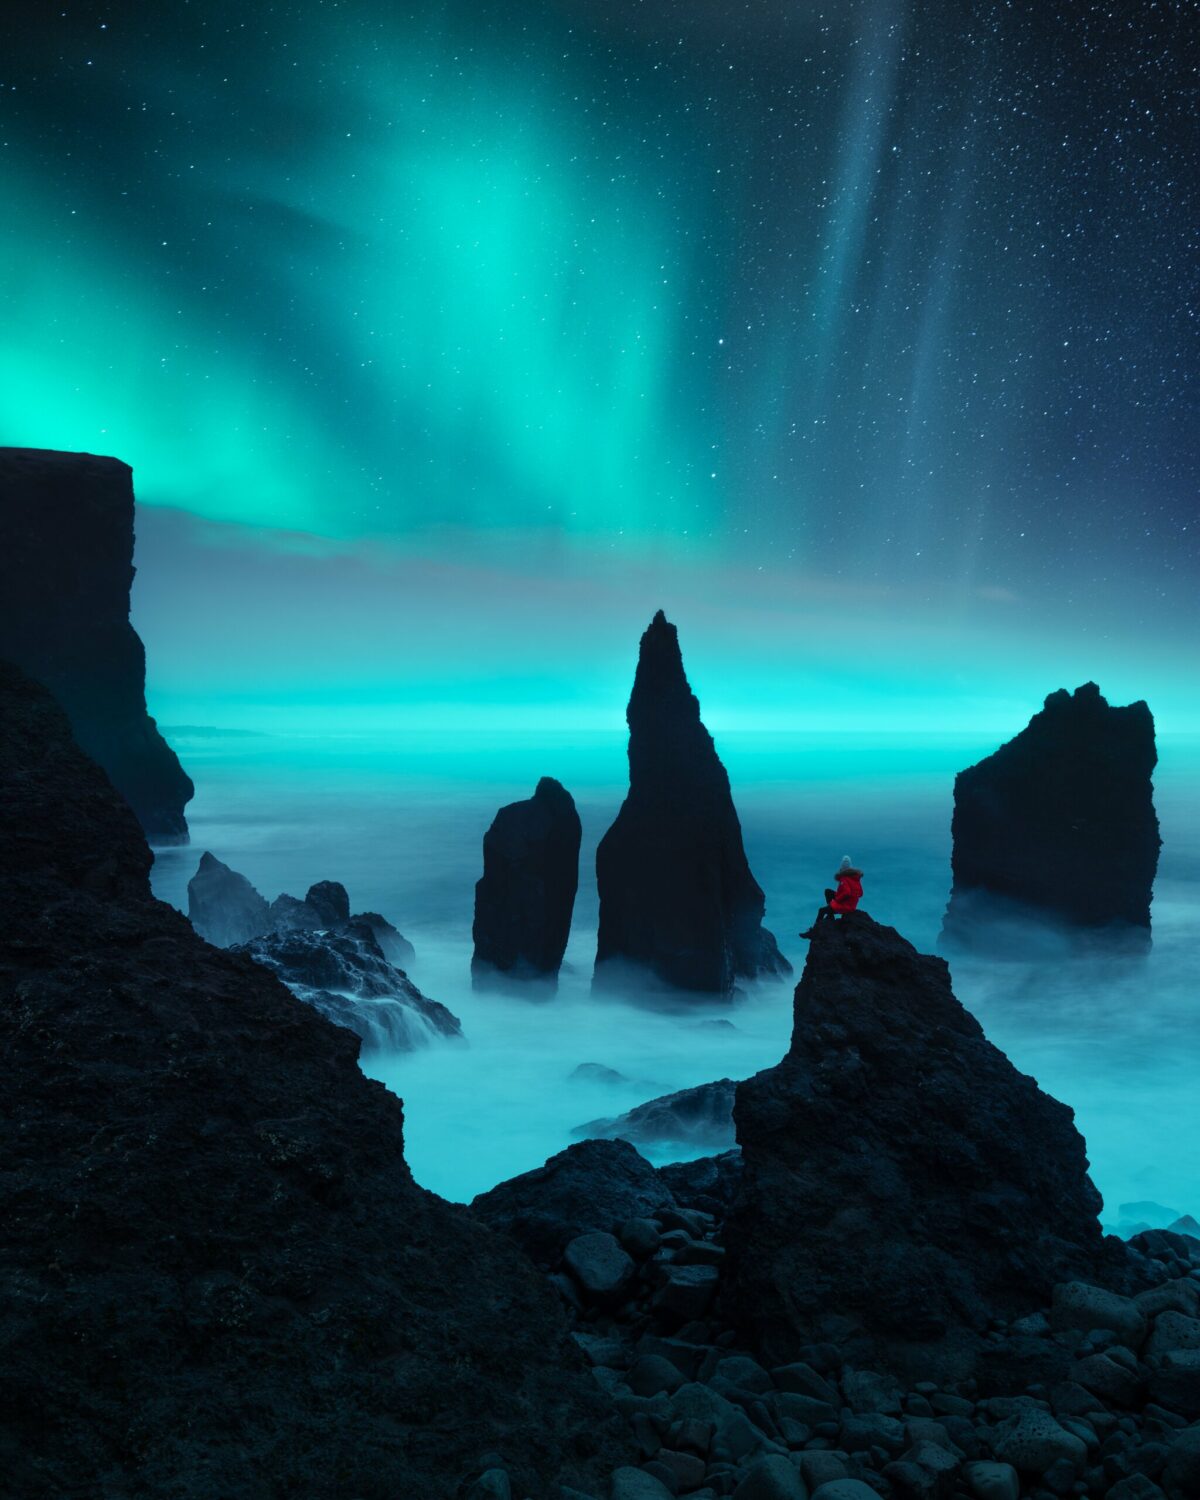 A photograph of a woman on a cliff overlooking the sea at night as blue-green aurora borealis dance above her.